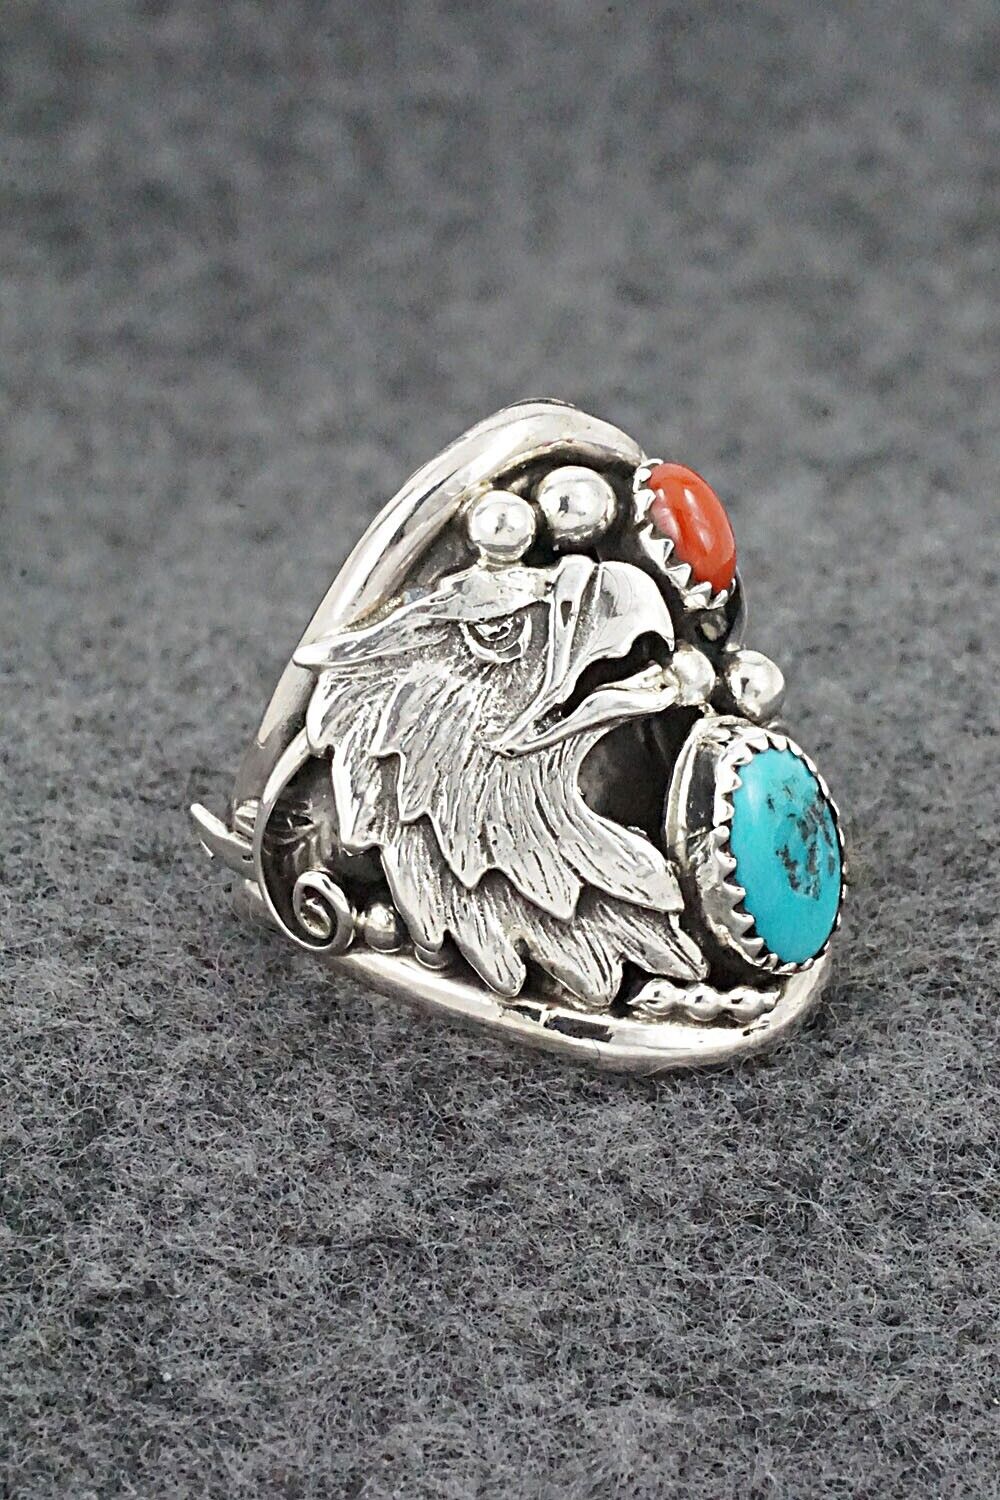 Turquoise, Coral & Sterling Silver Ring - Jeannette Saunders - Size 9.5